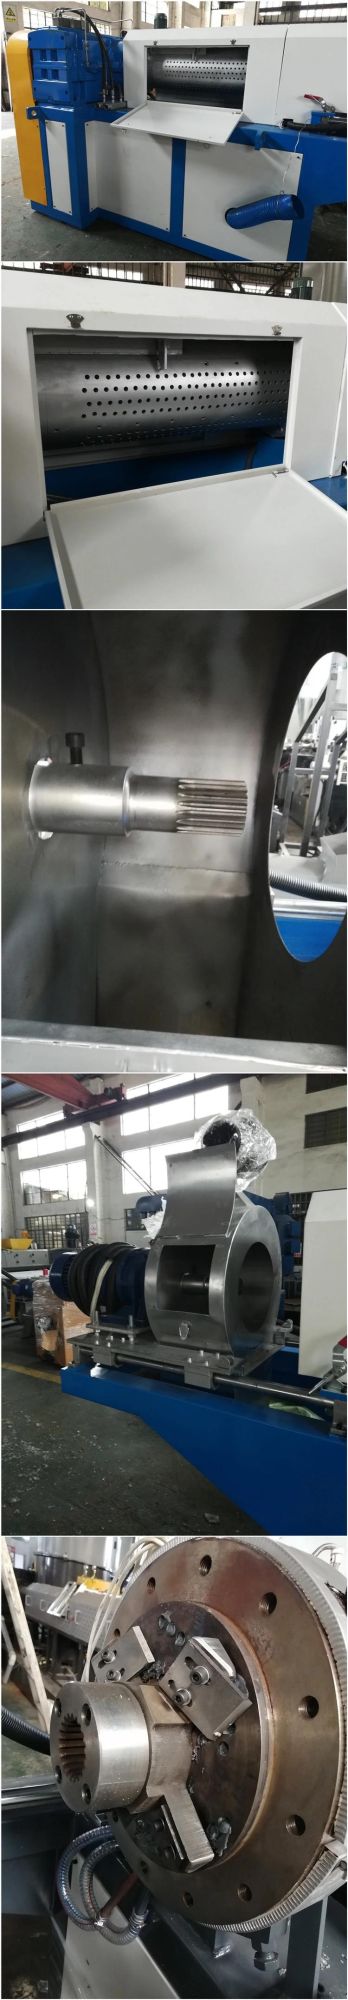 Competitive Price Plastic Squeezer Compactor Machine with Special Reducer